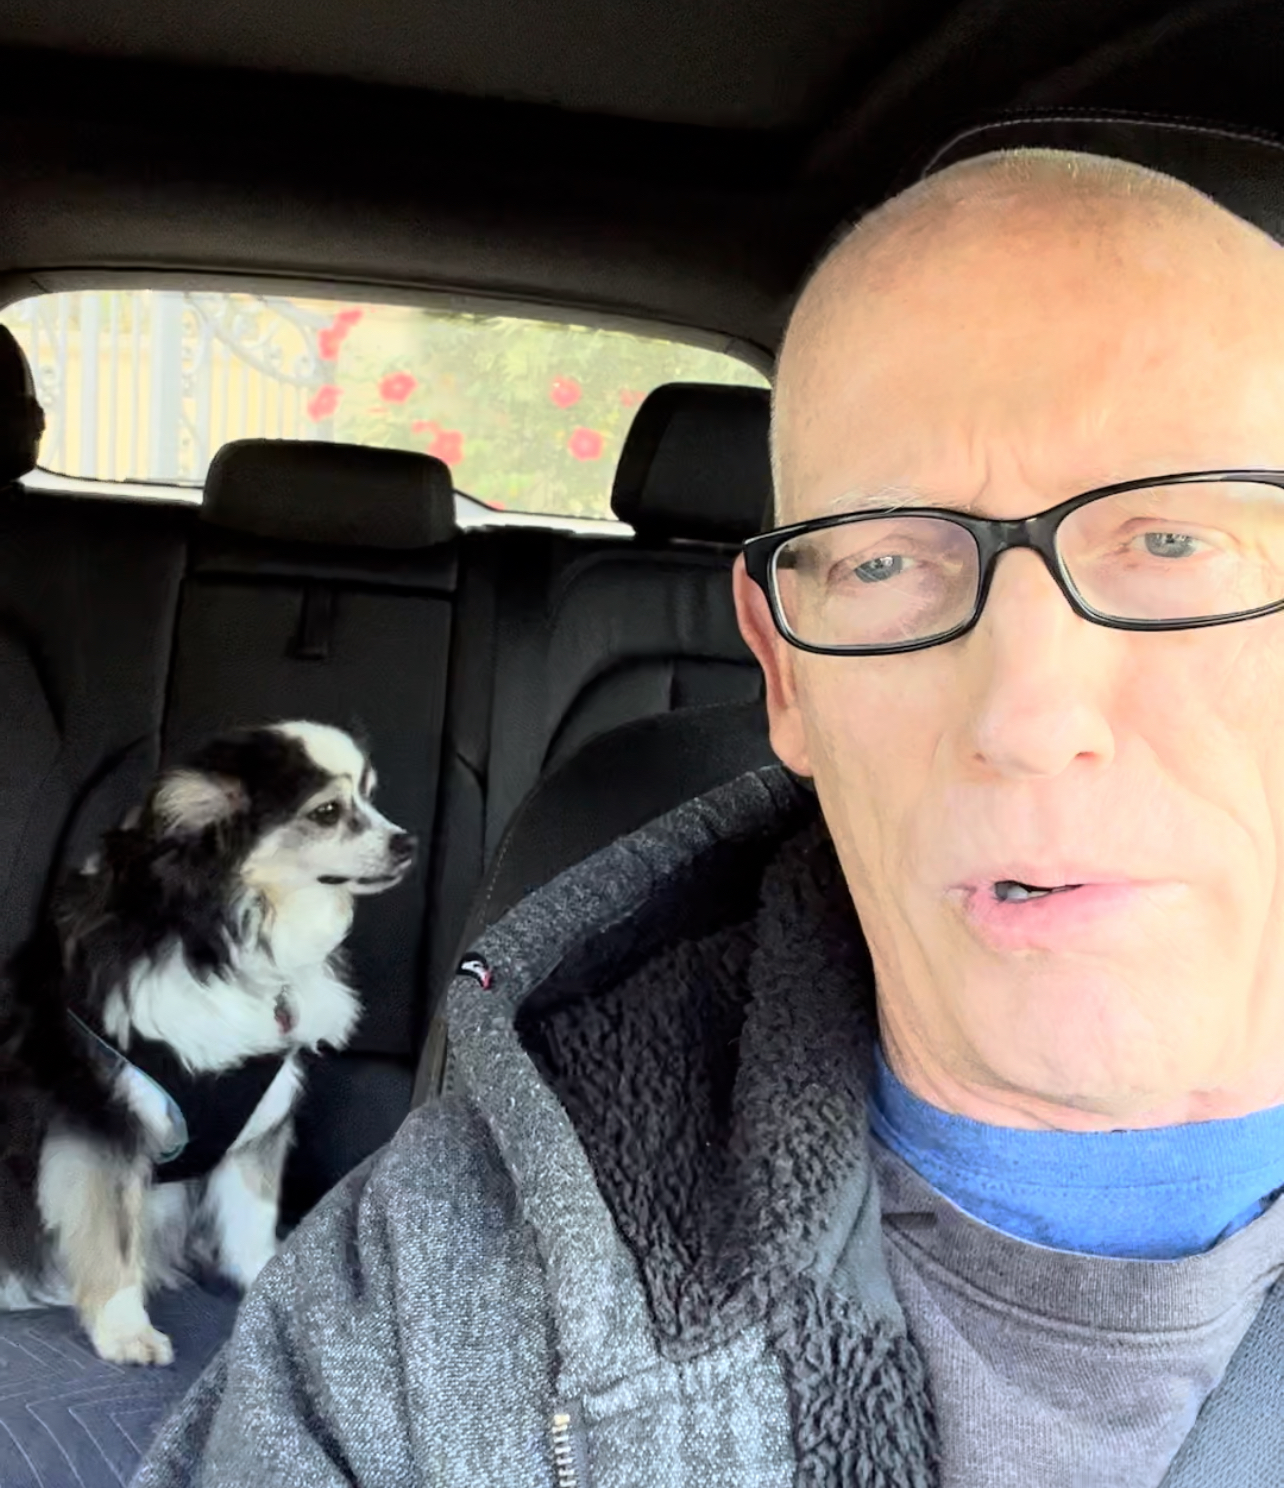 Scott Adams with his dog inside his car